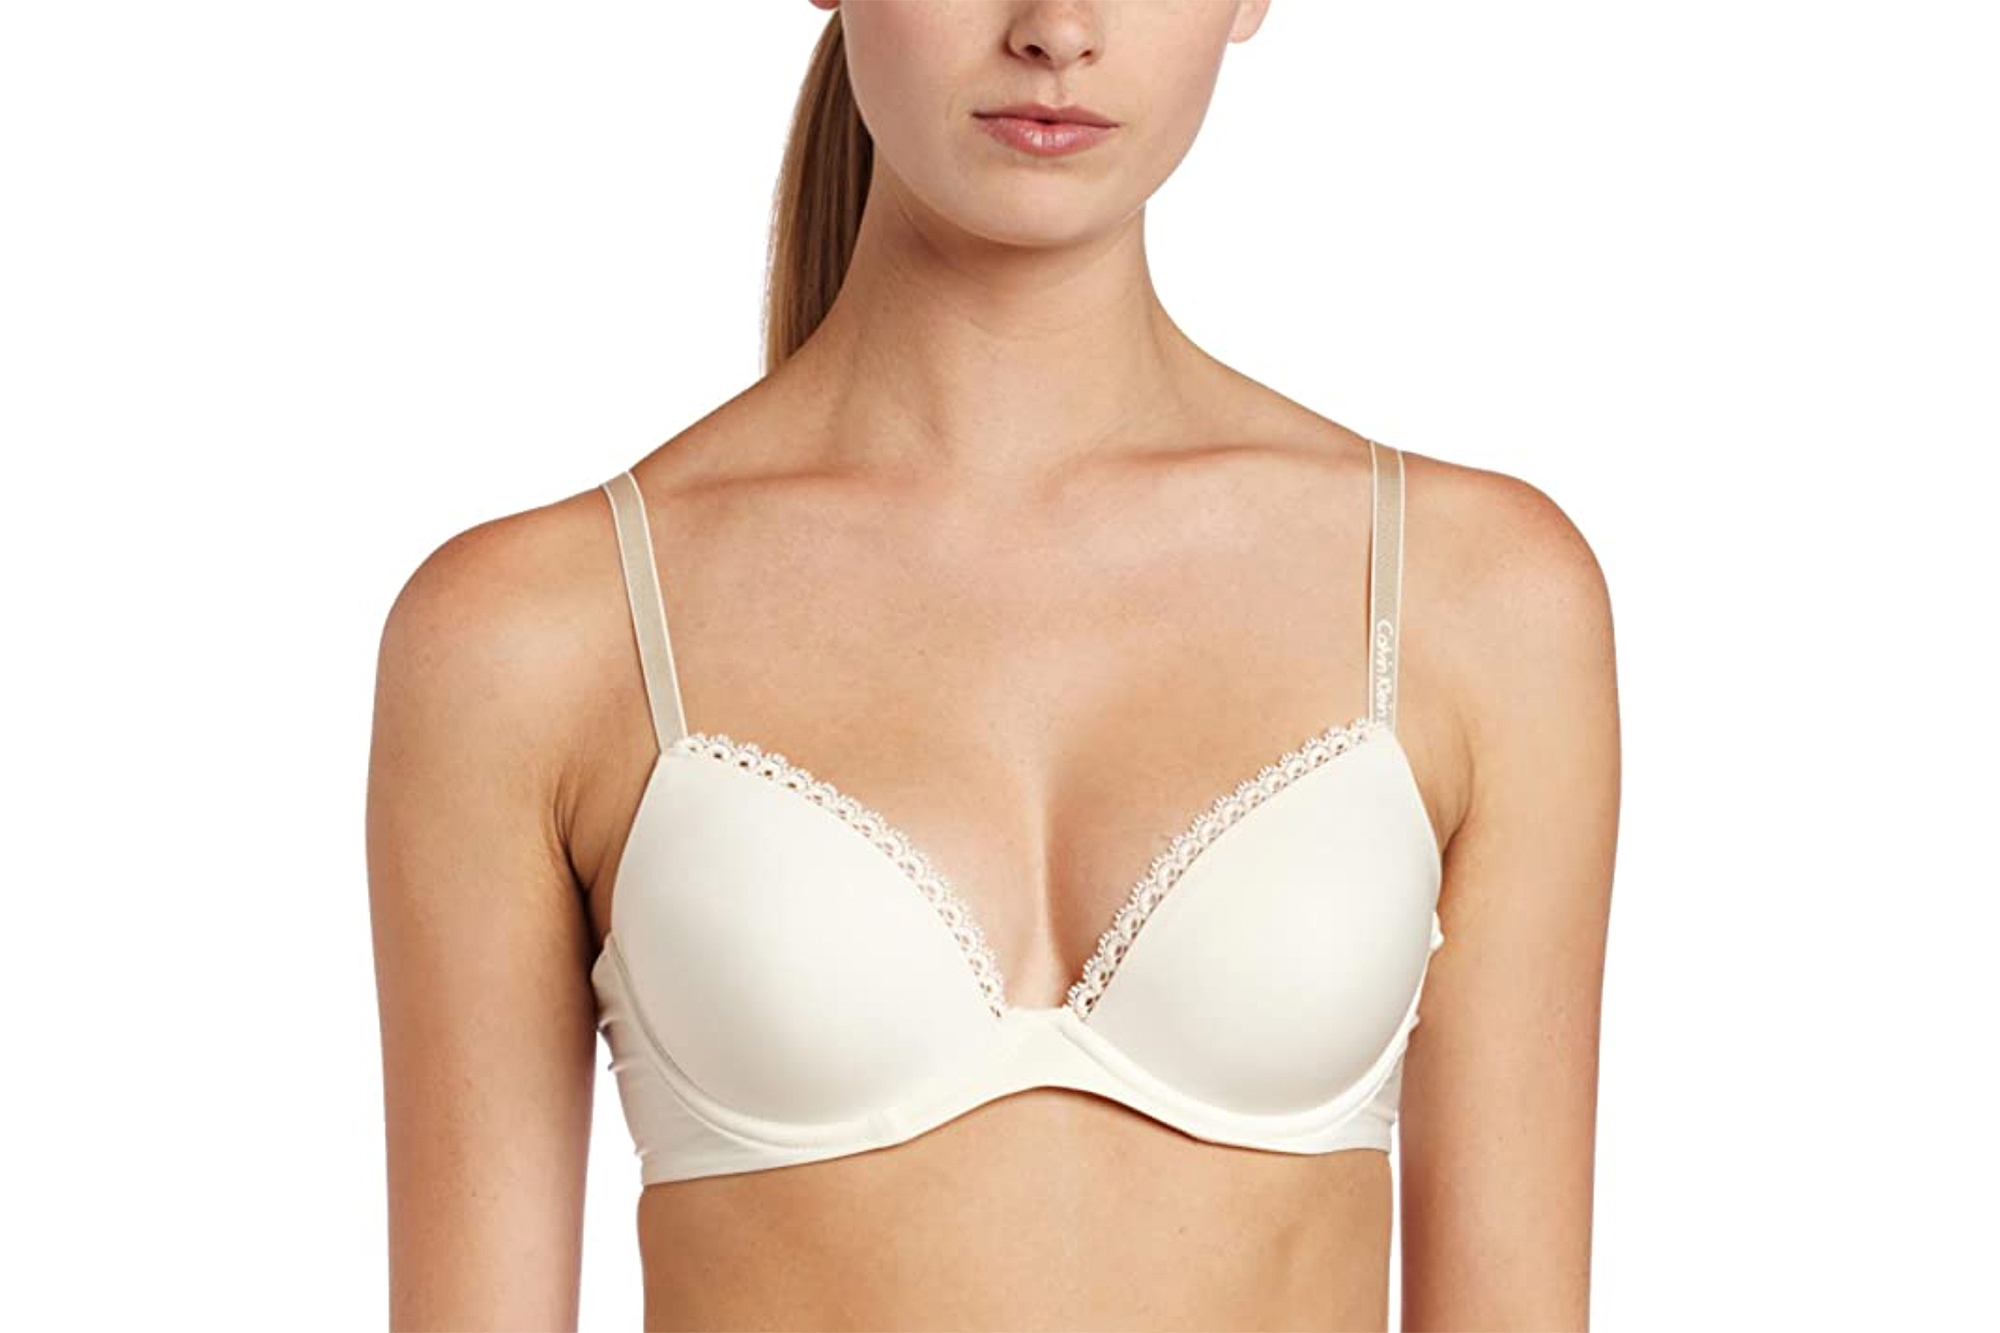 Calvin Klein 'Lifting' Bra Is Better Than a Push-Up and Much